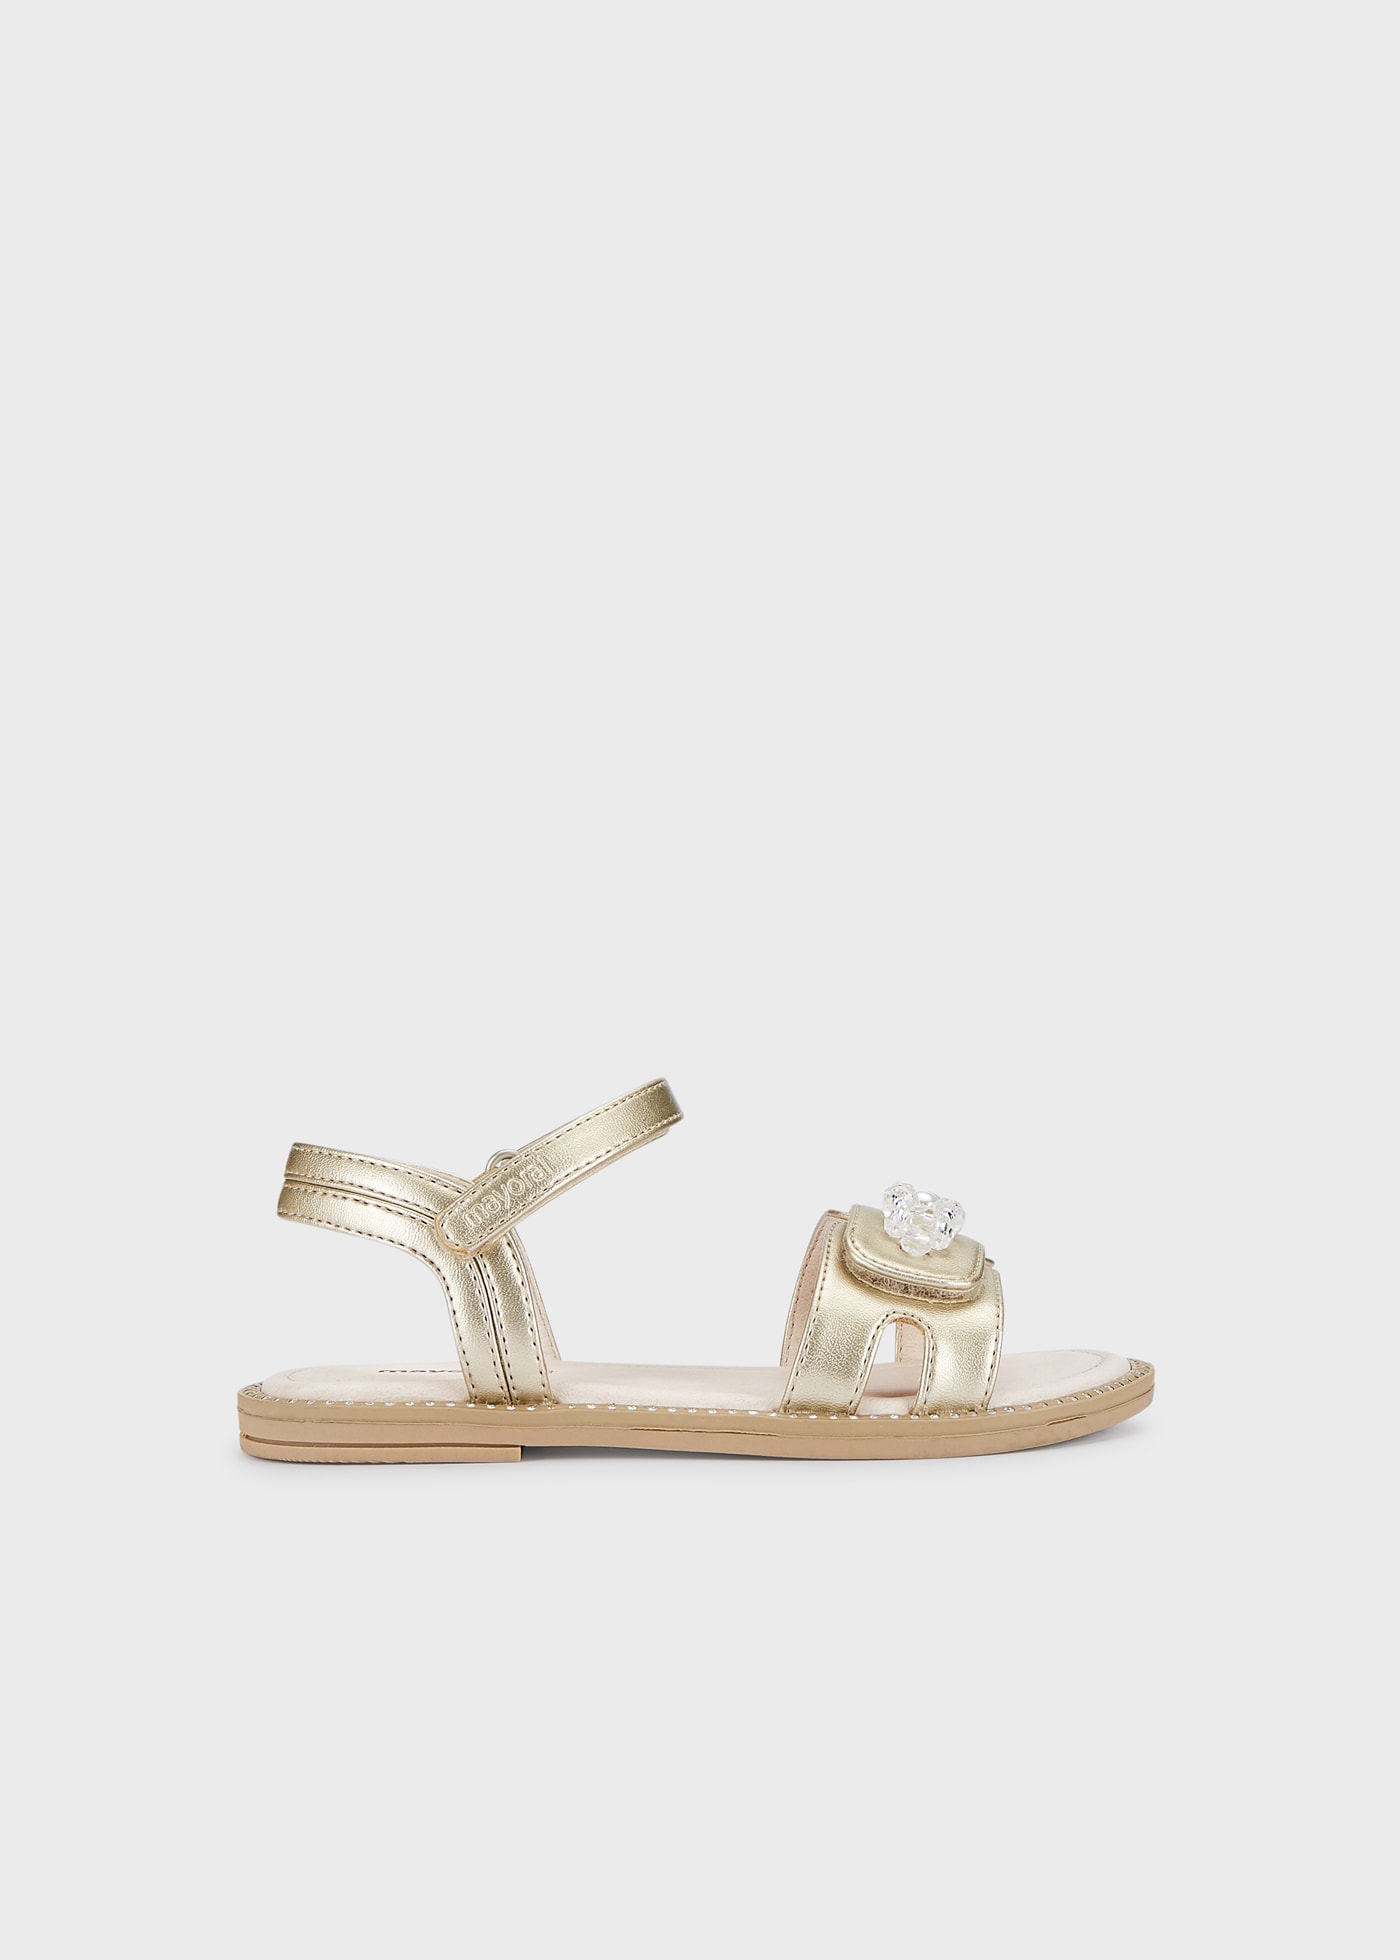 Sandals with pearl embellishment girl